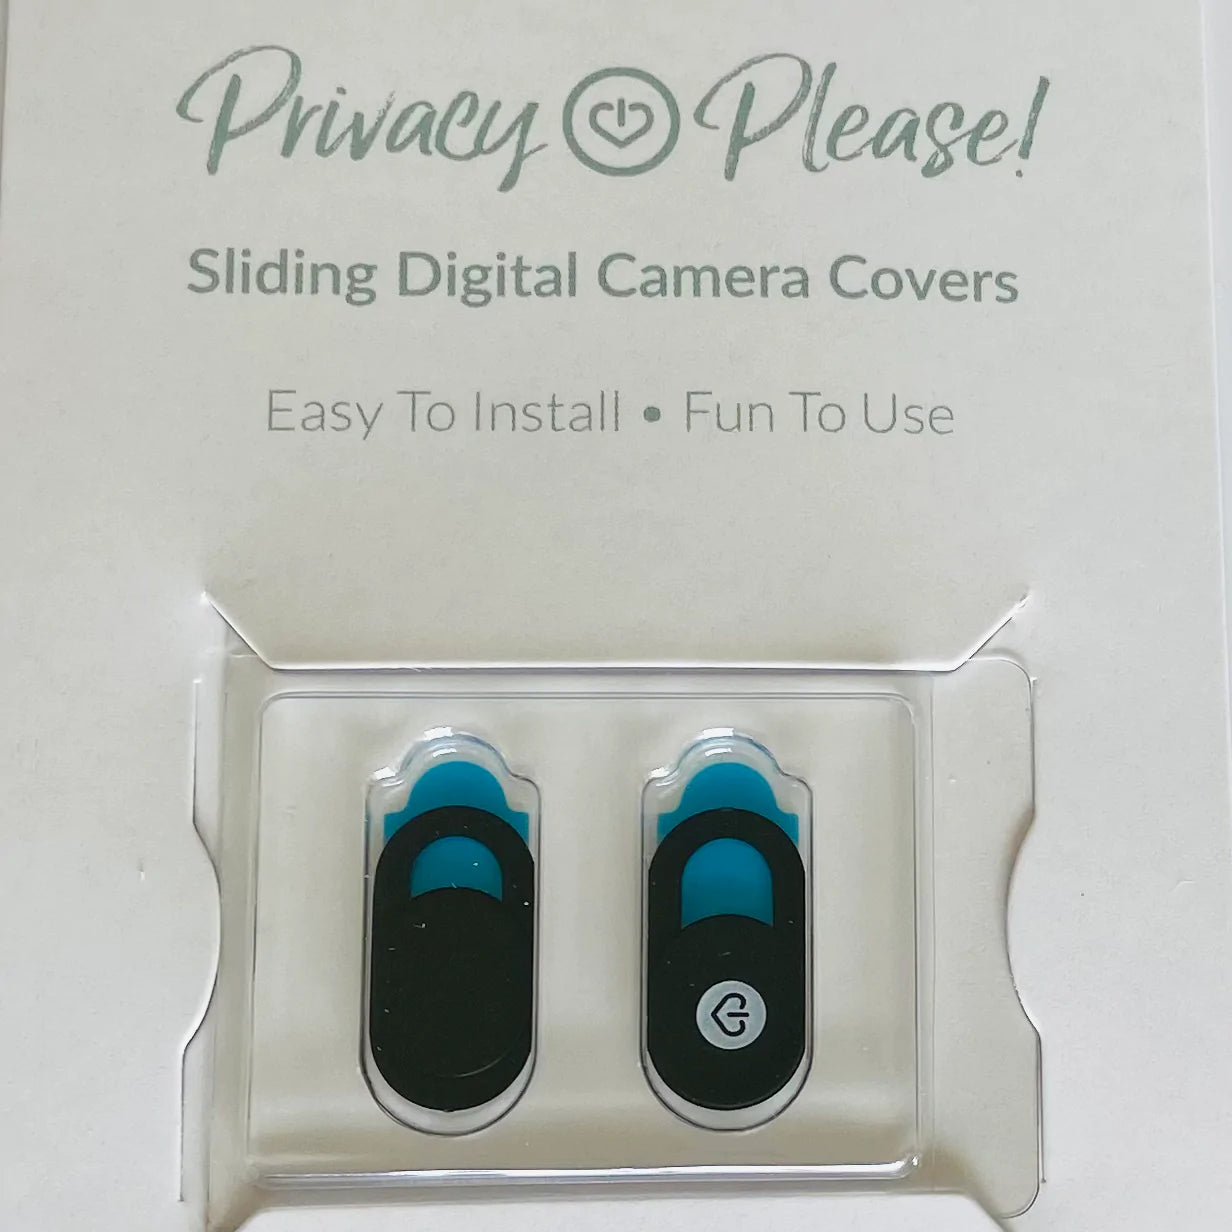 Privacy Protection Pack: Camera Covers, Faraday Bag & Password